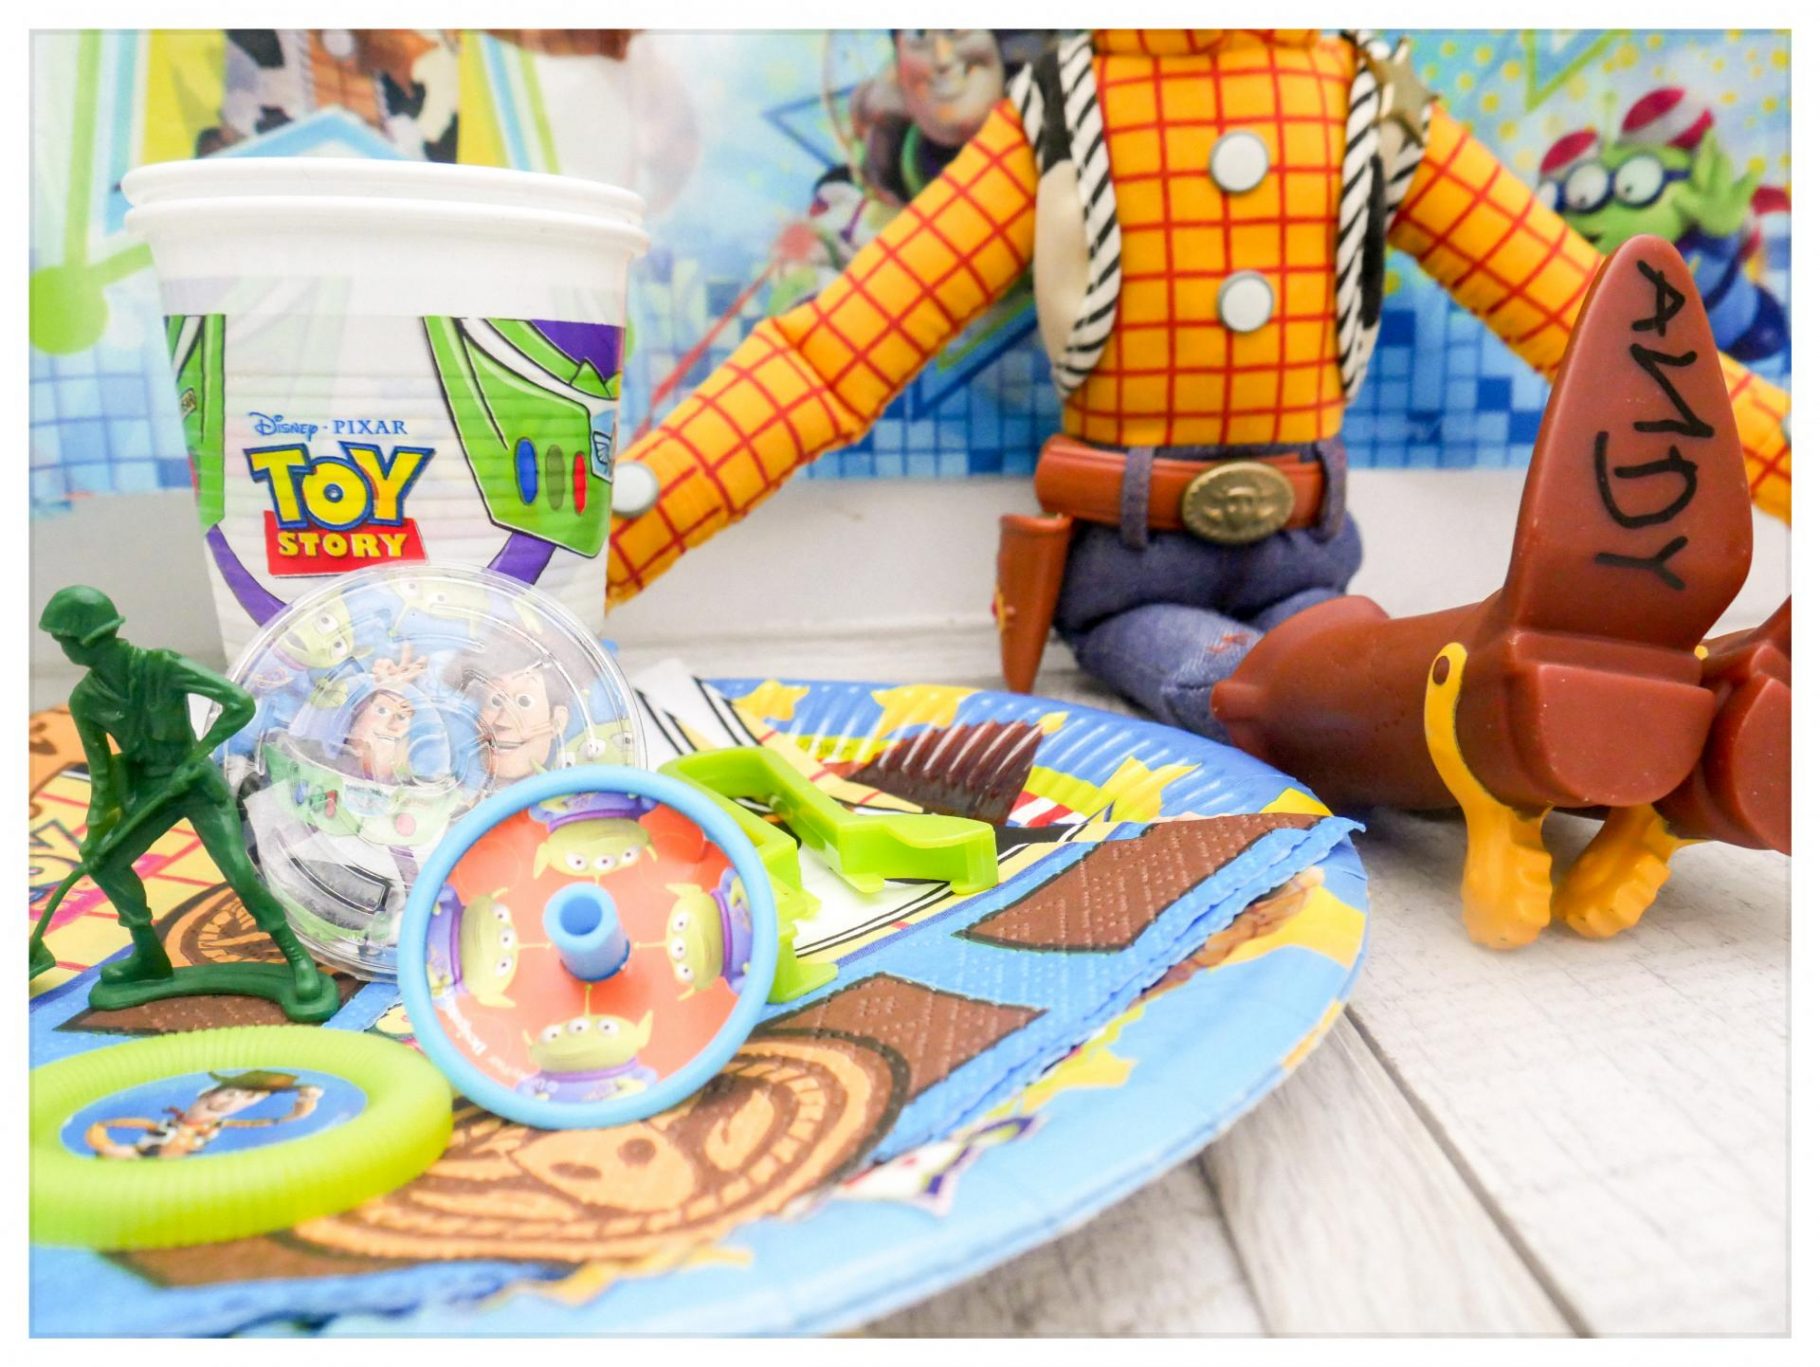 A Toy Story Party with 8 essential kids’ party planning tips